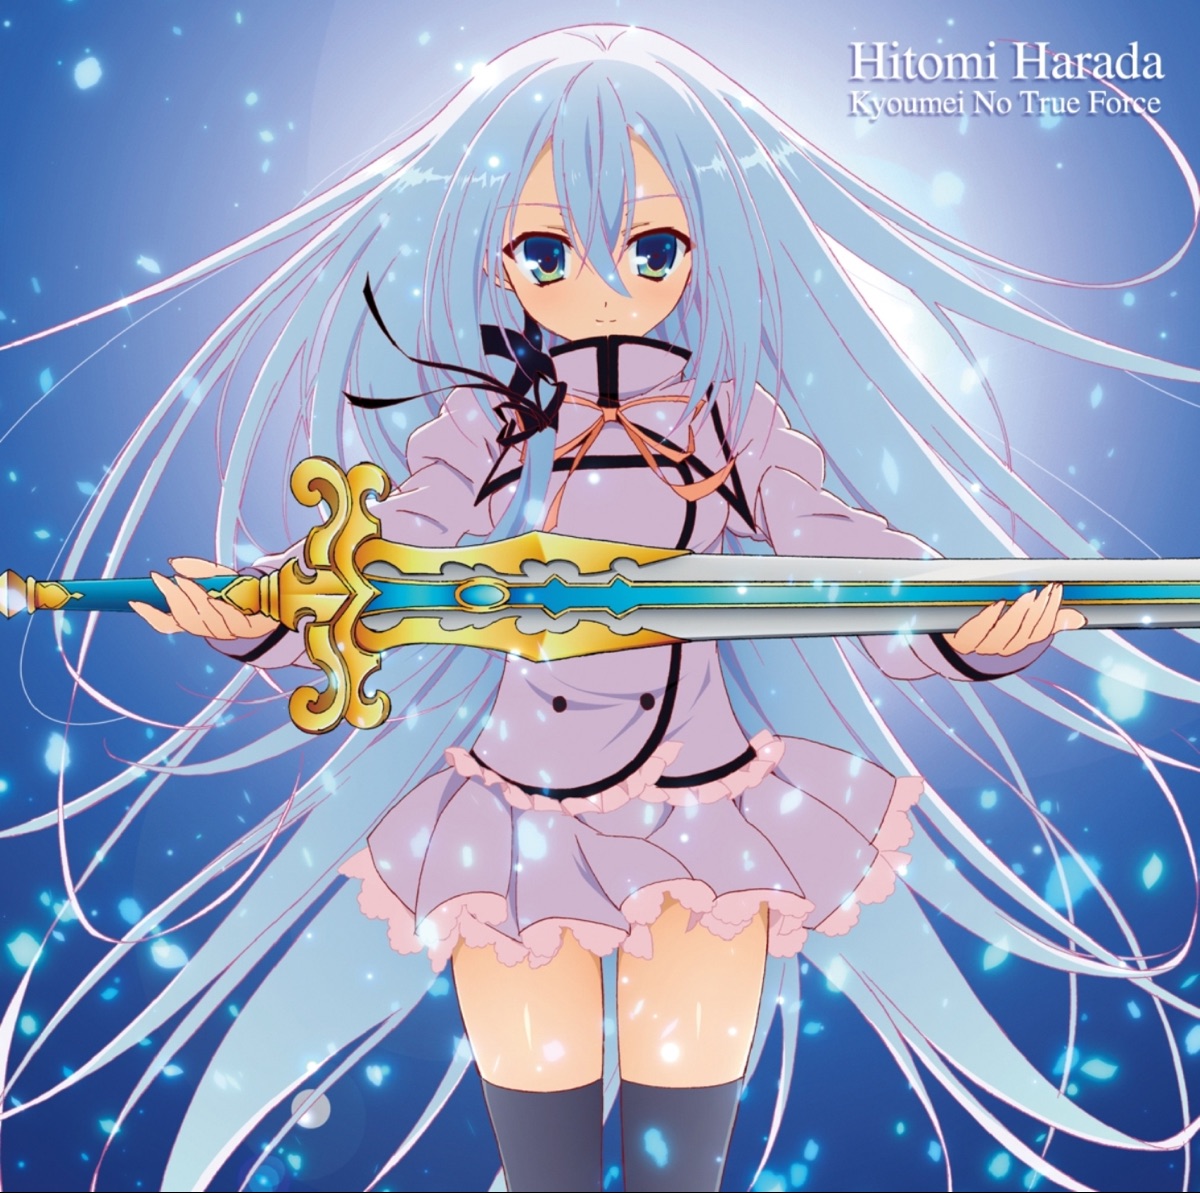 Cover art for『Hitomi Harada - 共鳴のTrue Force』from the release『Kyoumei no True Force